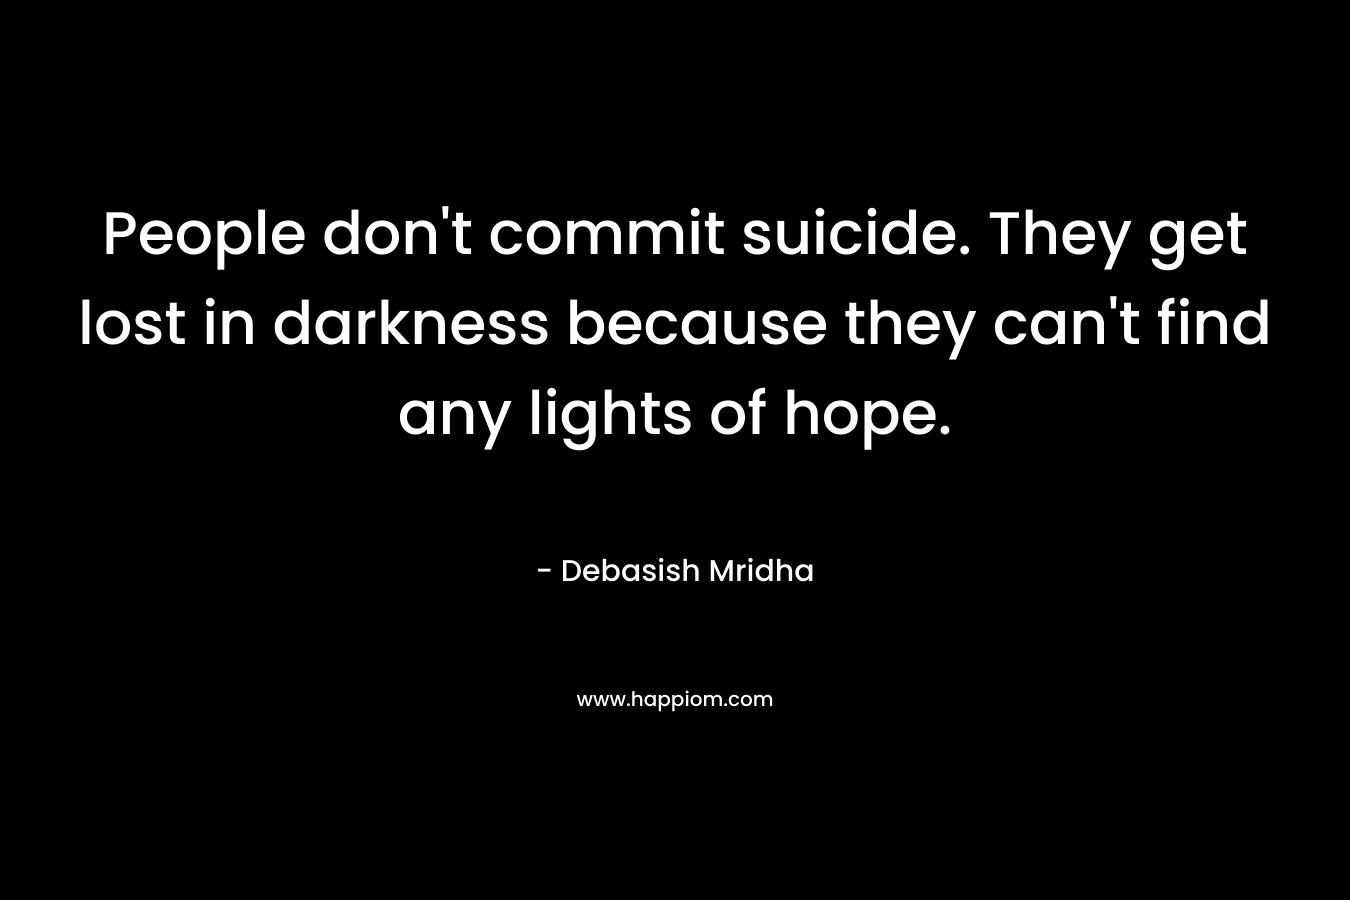 People don't commit suicide. They get lost in darkness because they can't find any lights of hope.